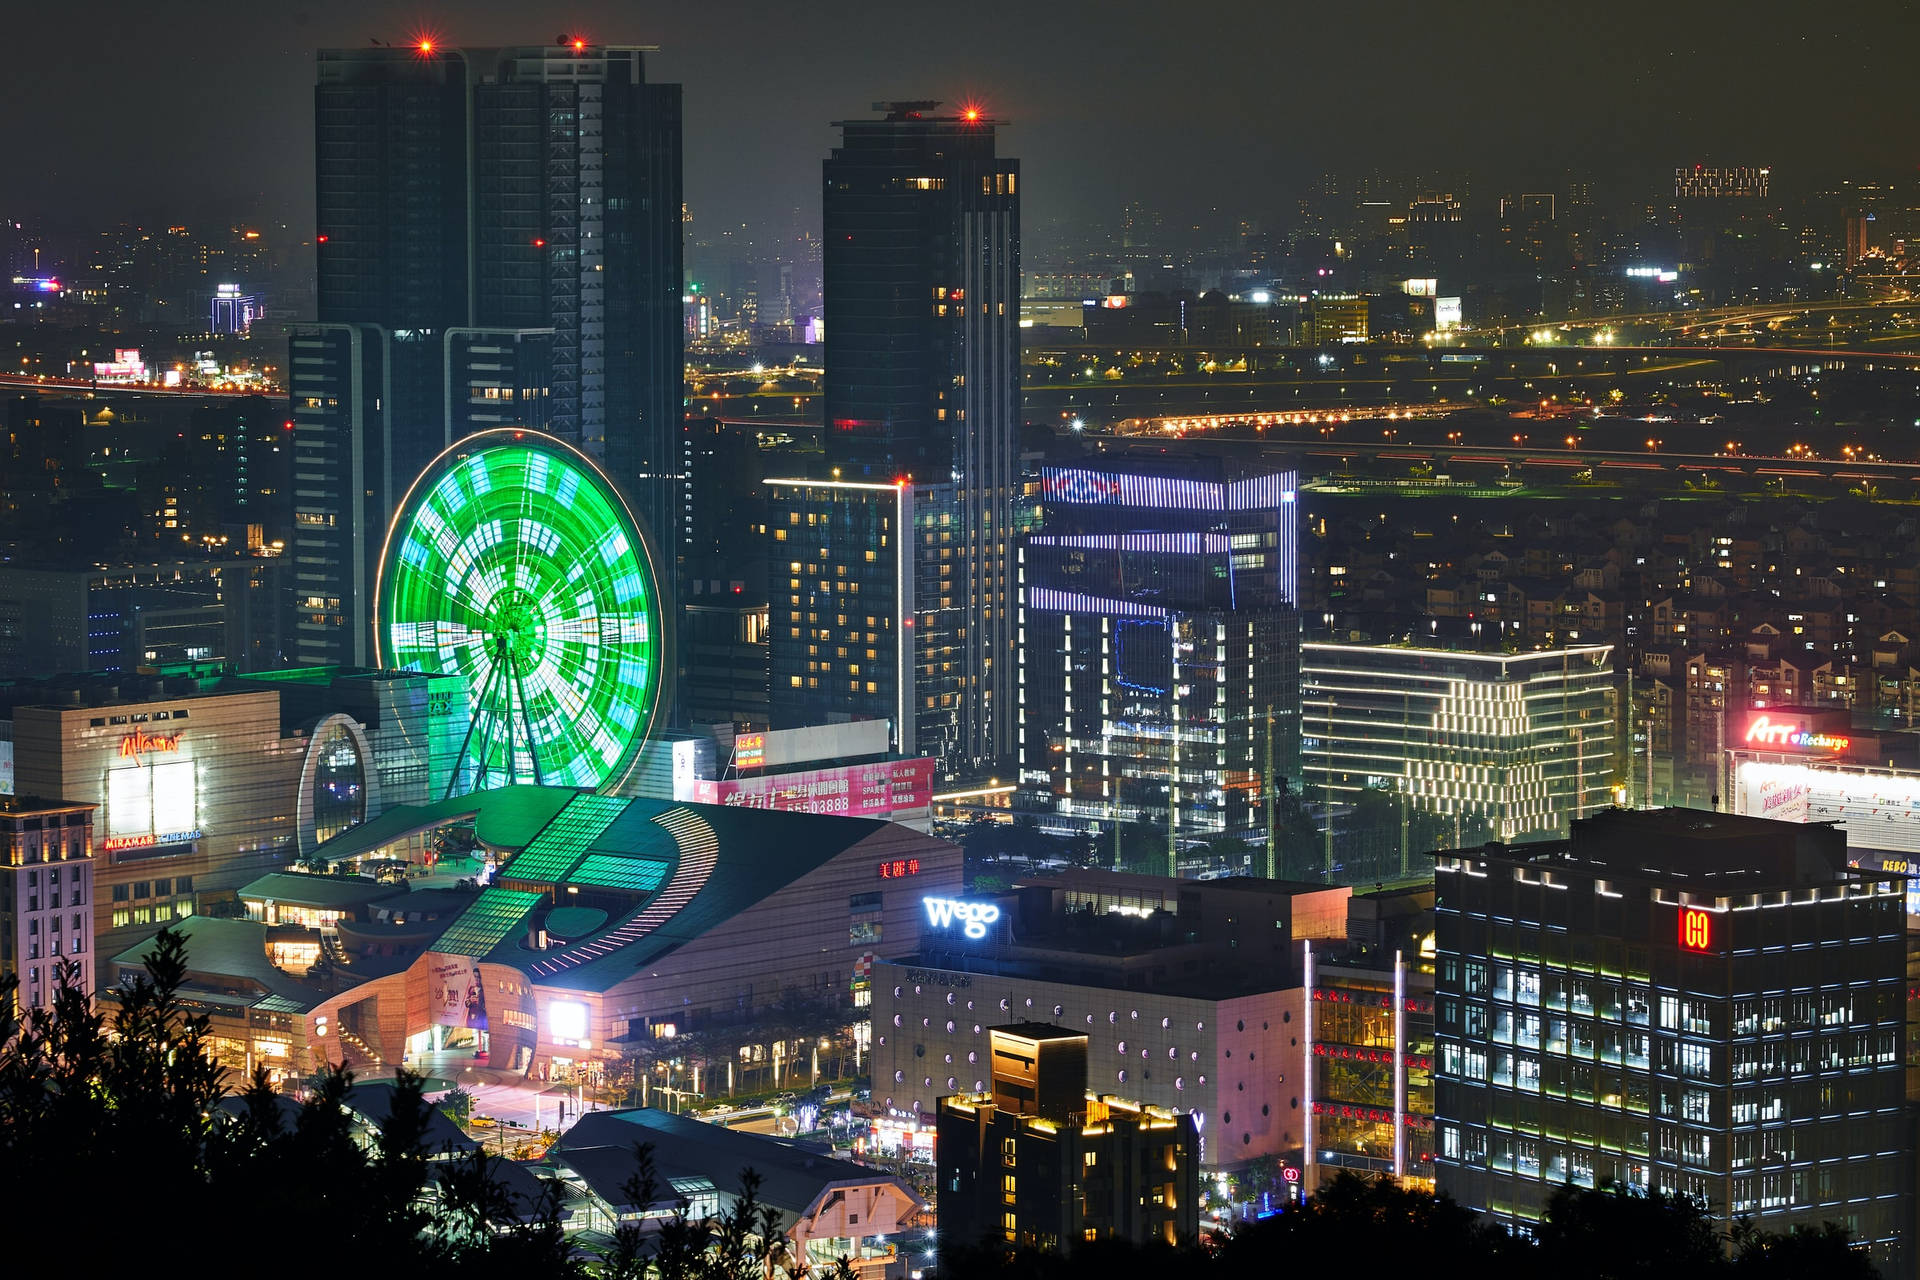 Night View Of The Bustling Cityscape Of Taipei With Miramar Ferris Wheel.